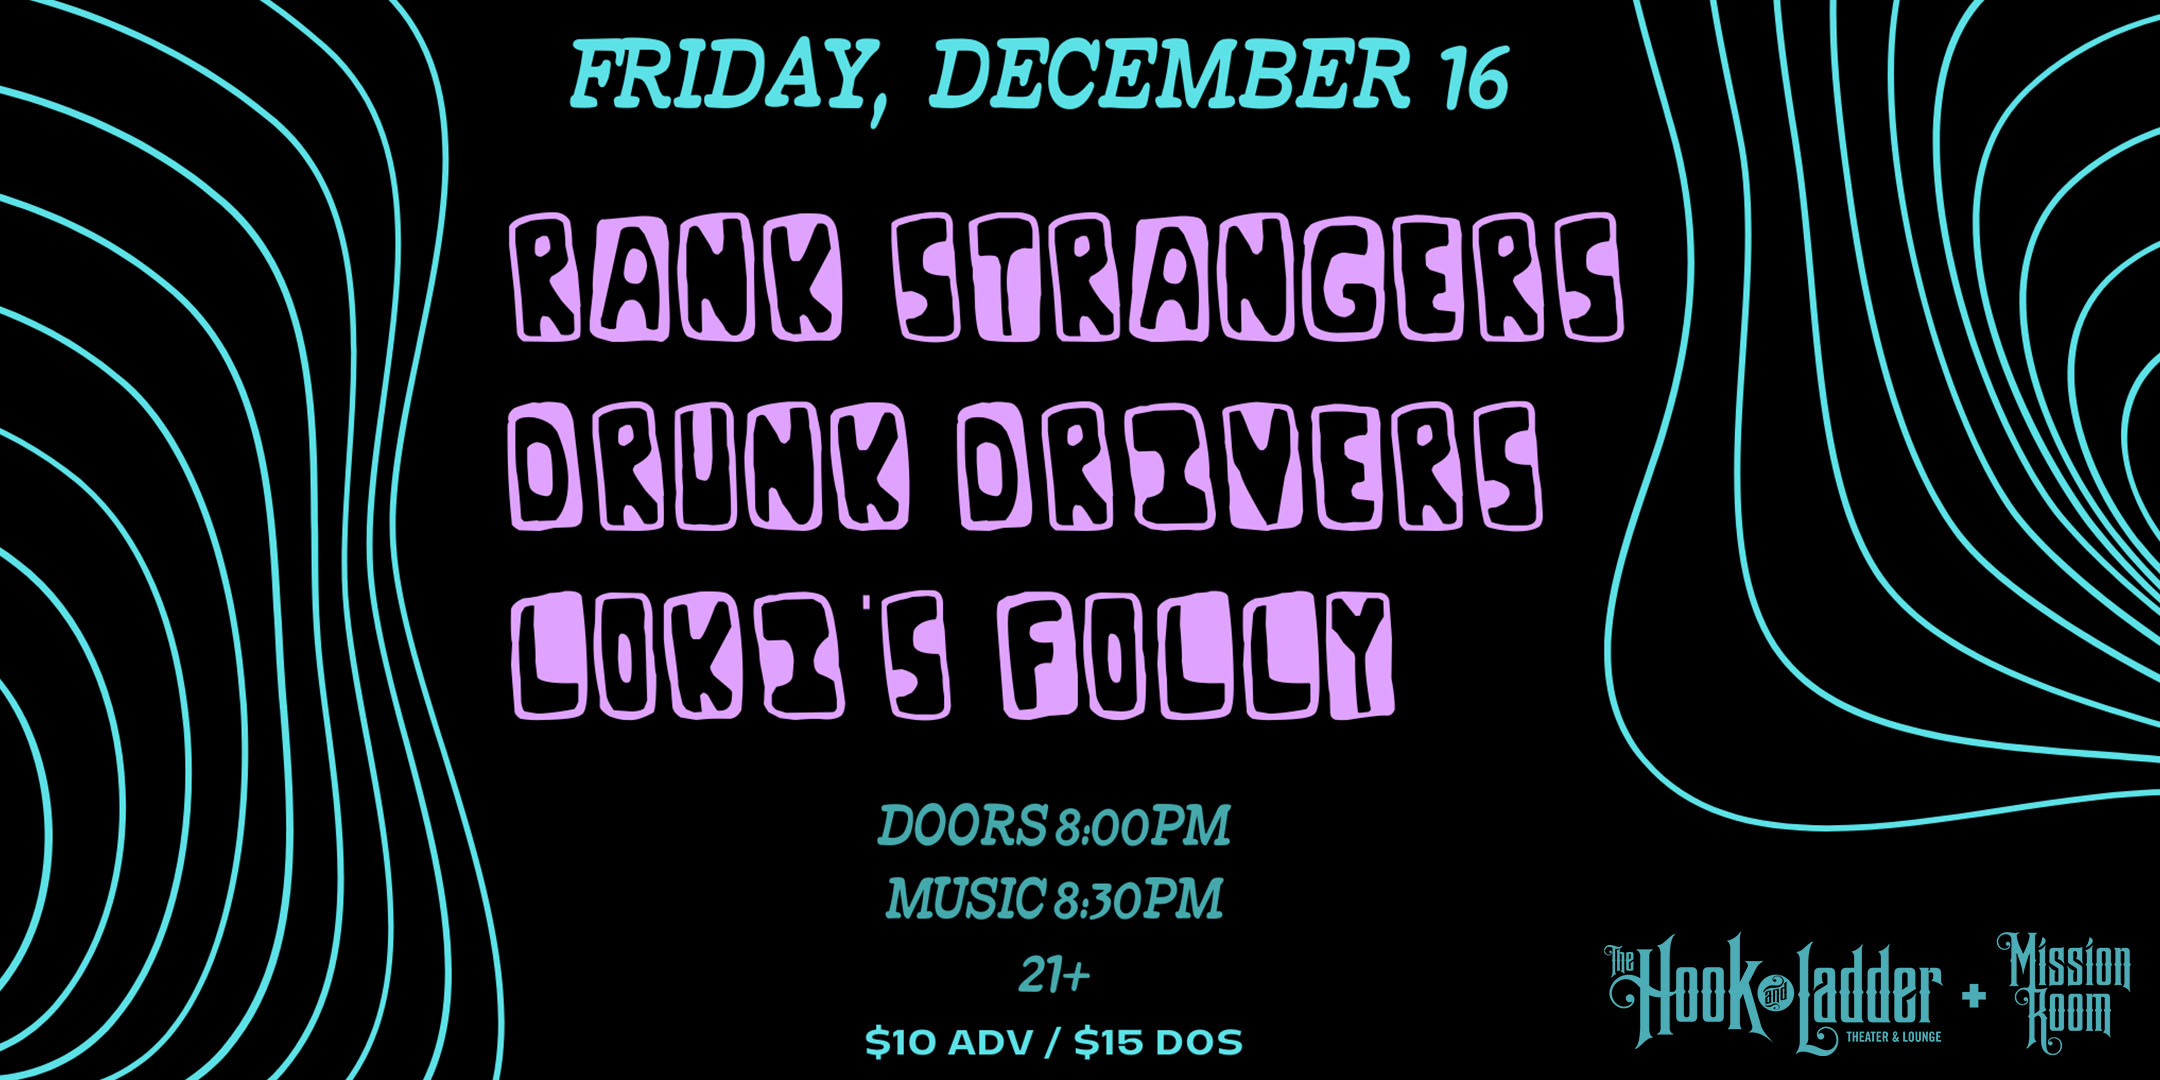 Rank Strangers Drunk Drivers Loki's Folly Friday, December 16 The Mission Room Doors 8:00pm :: Music 8:30pm :: 21+ $10 ADV / $15 DOS